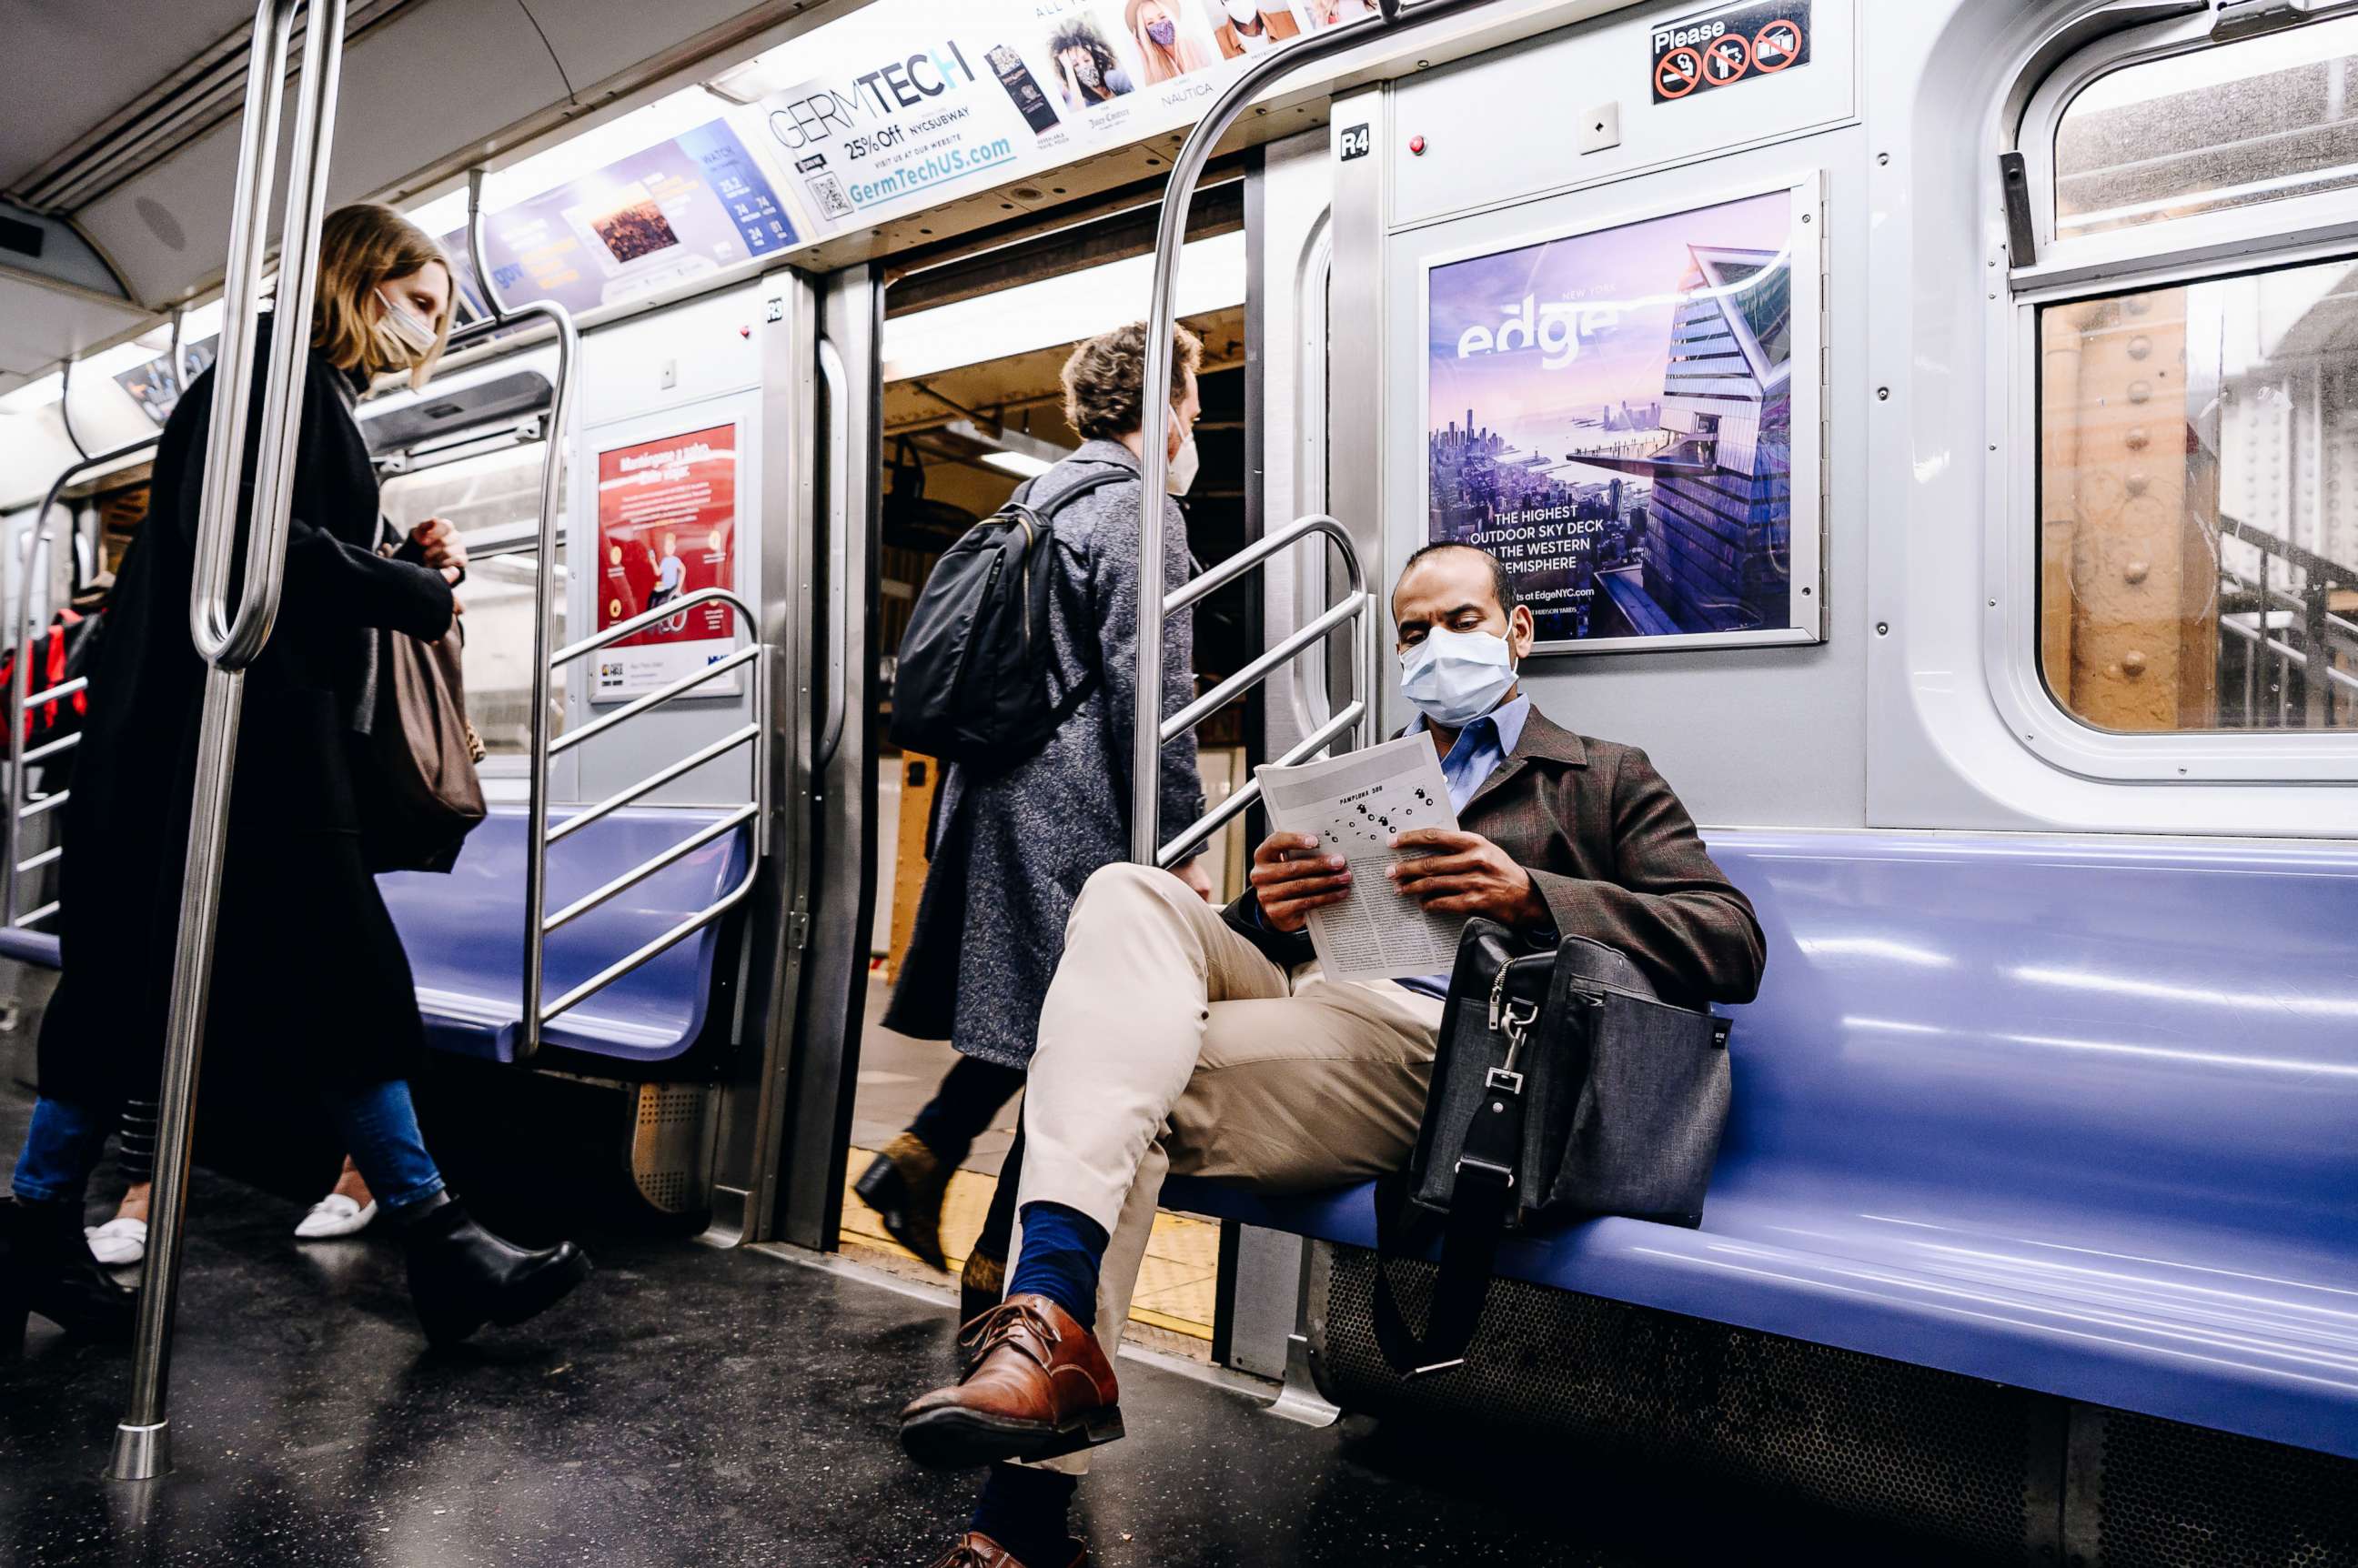 PHOTO: A passenger wearing a protective mask reads while riding on the L subway train in New York, April 13, 2021.